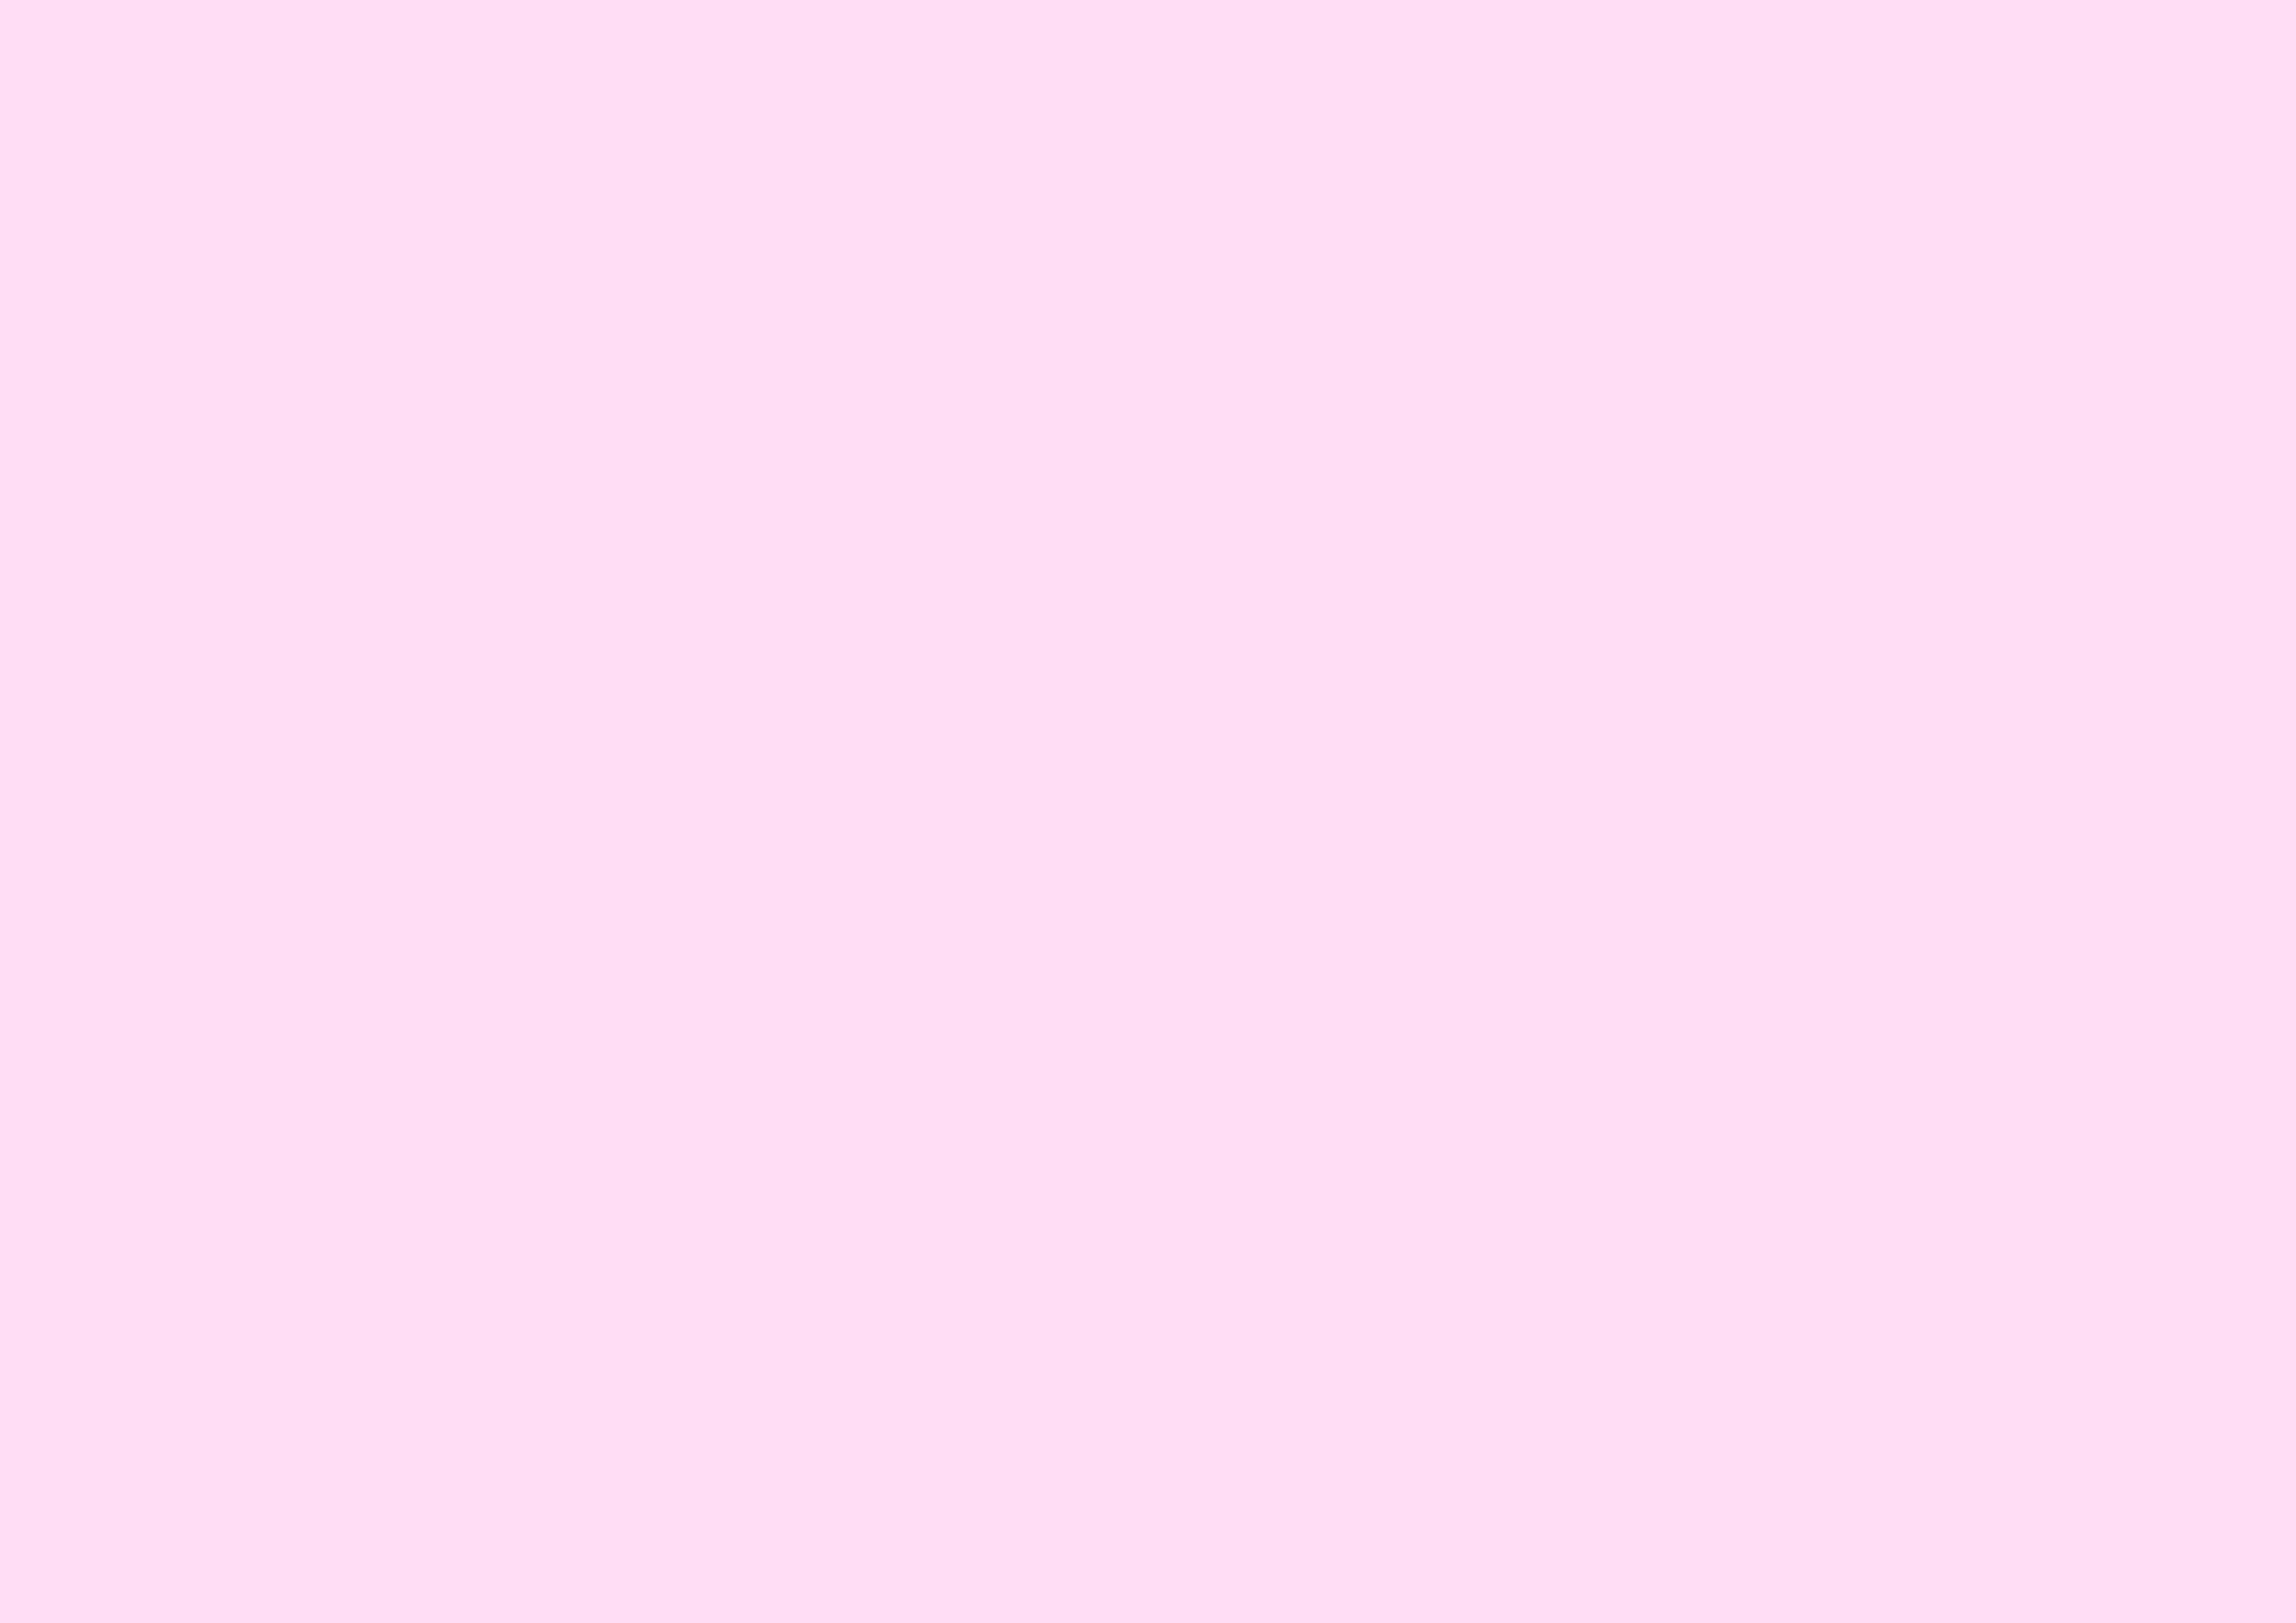 3508x2480 Pink Lace Solid Color Background